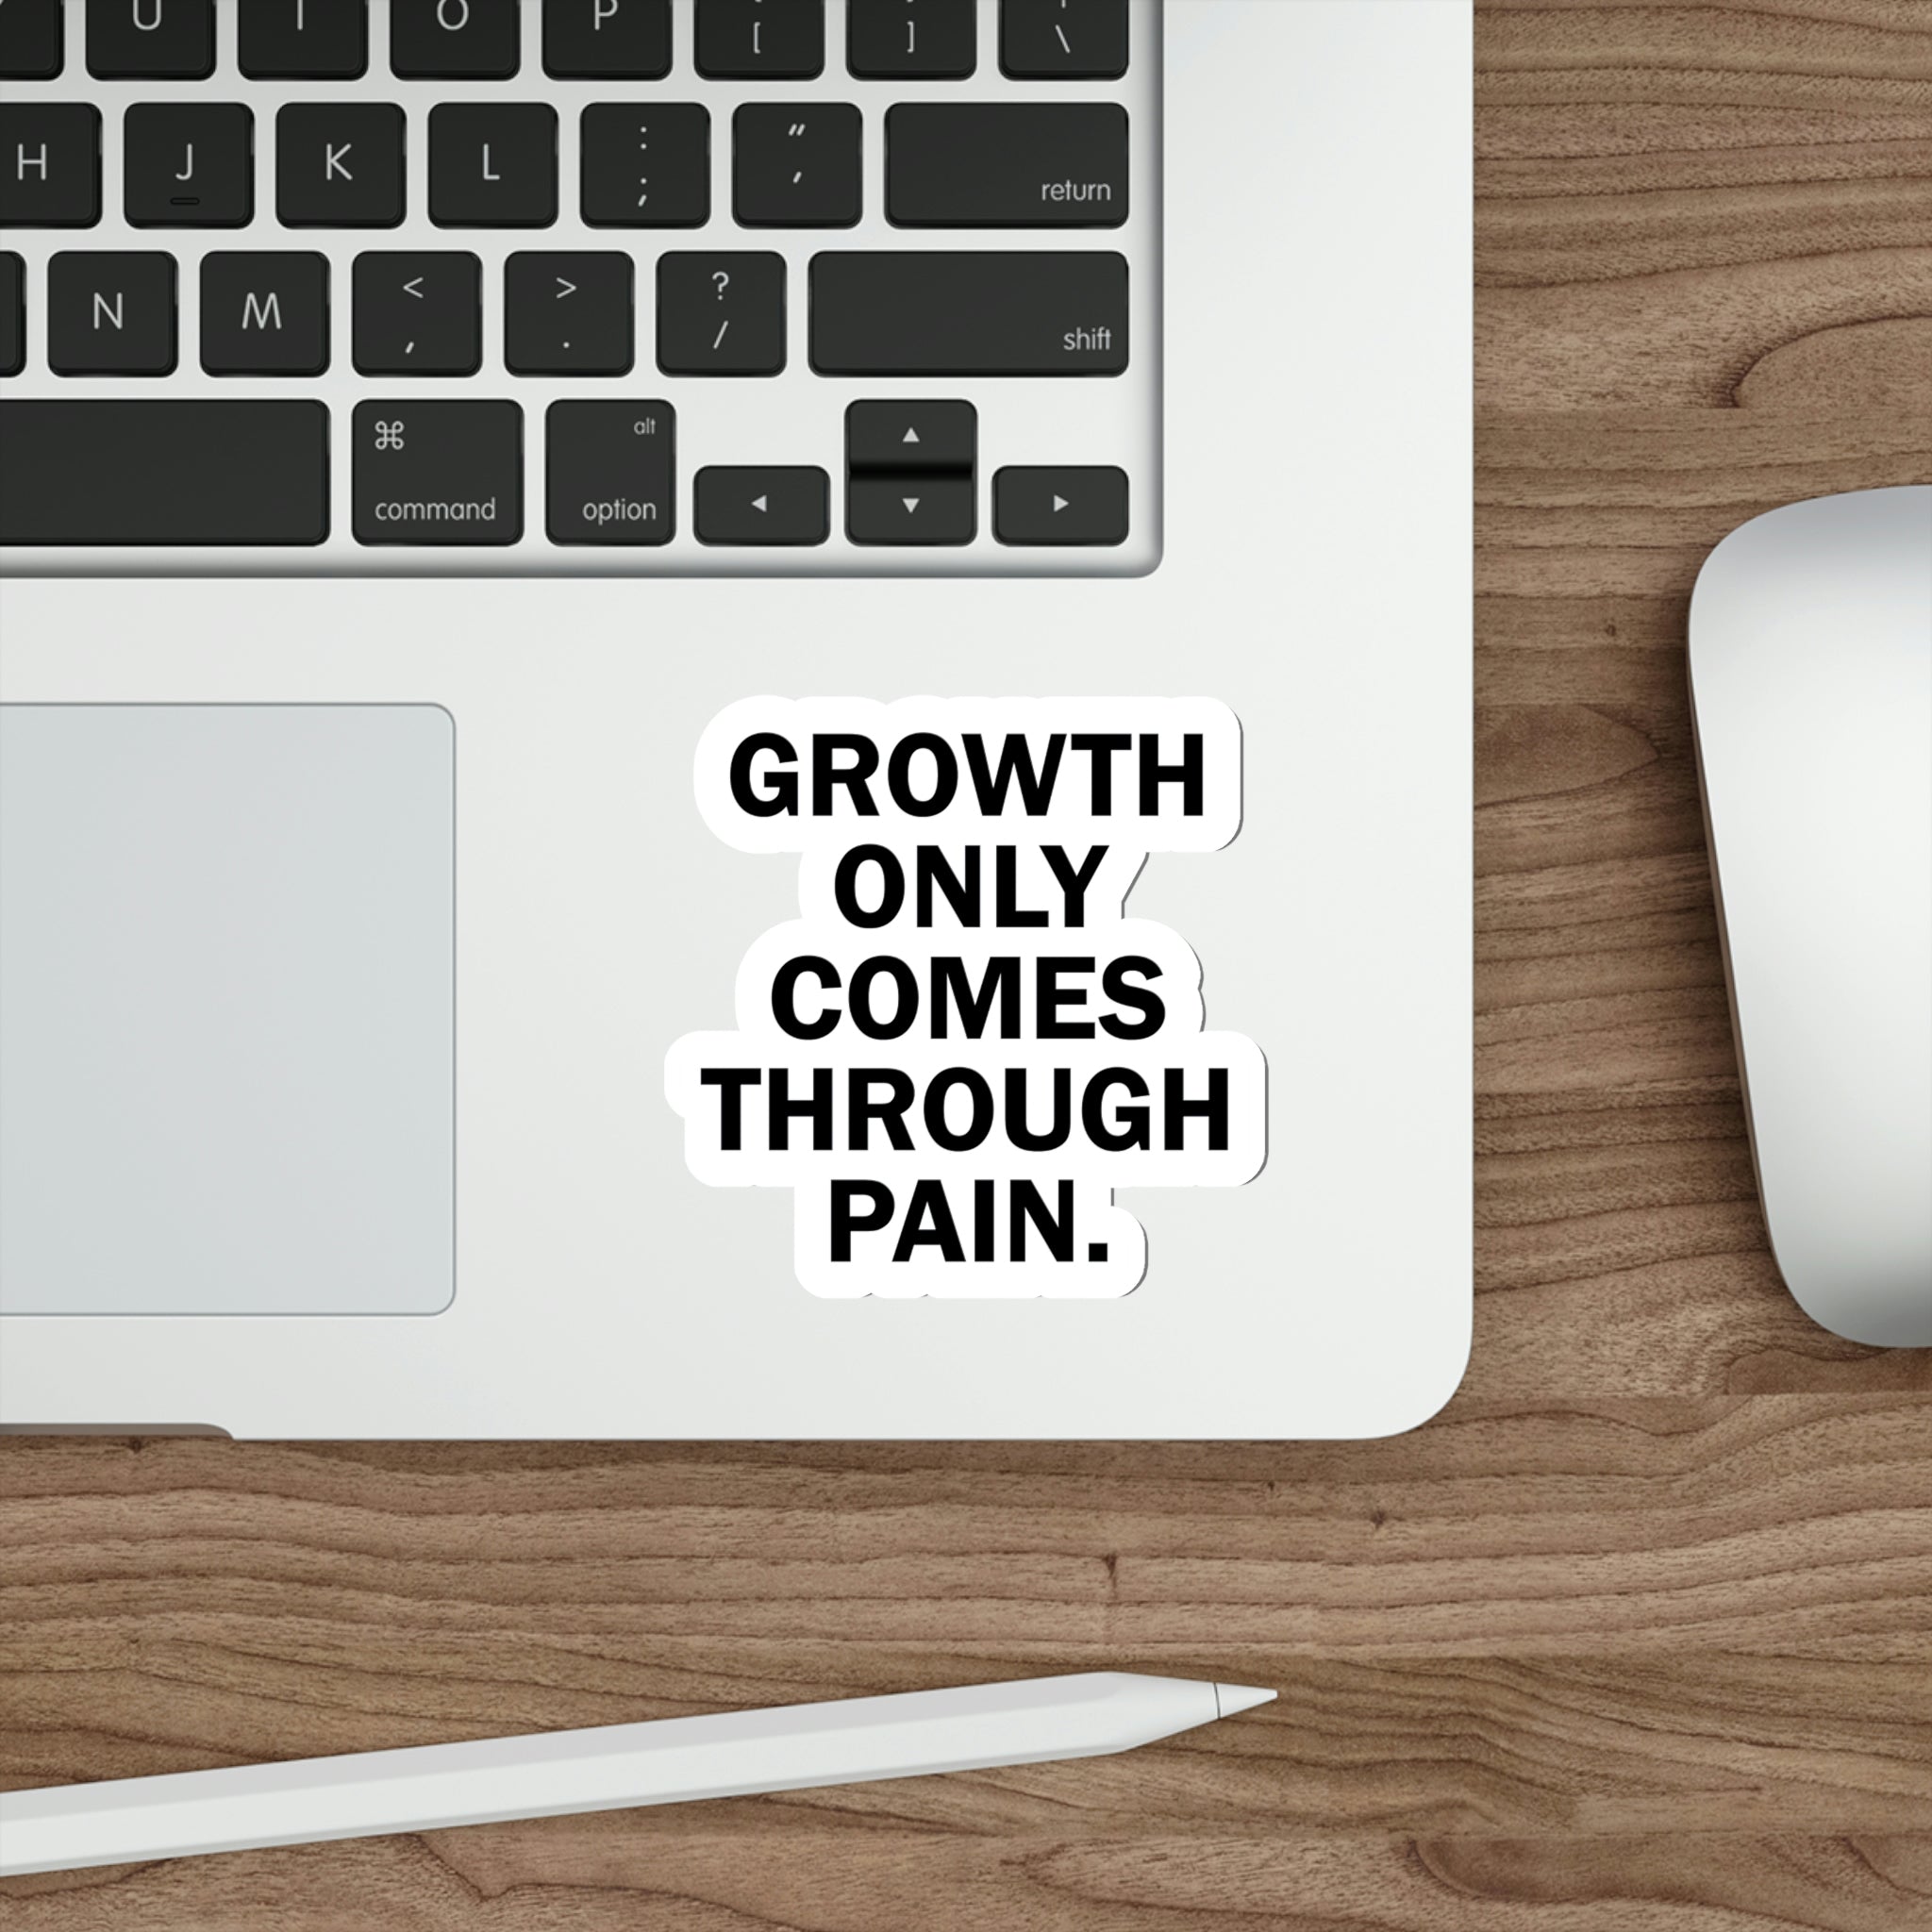 Growth only comes through pain sticker | Short deep quotes about pain #size_4x4-inches